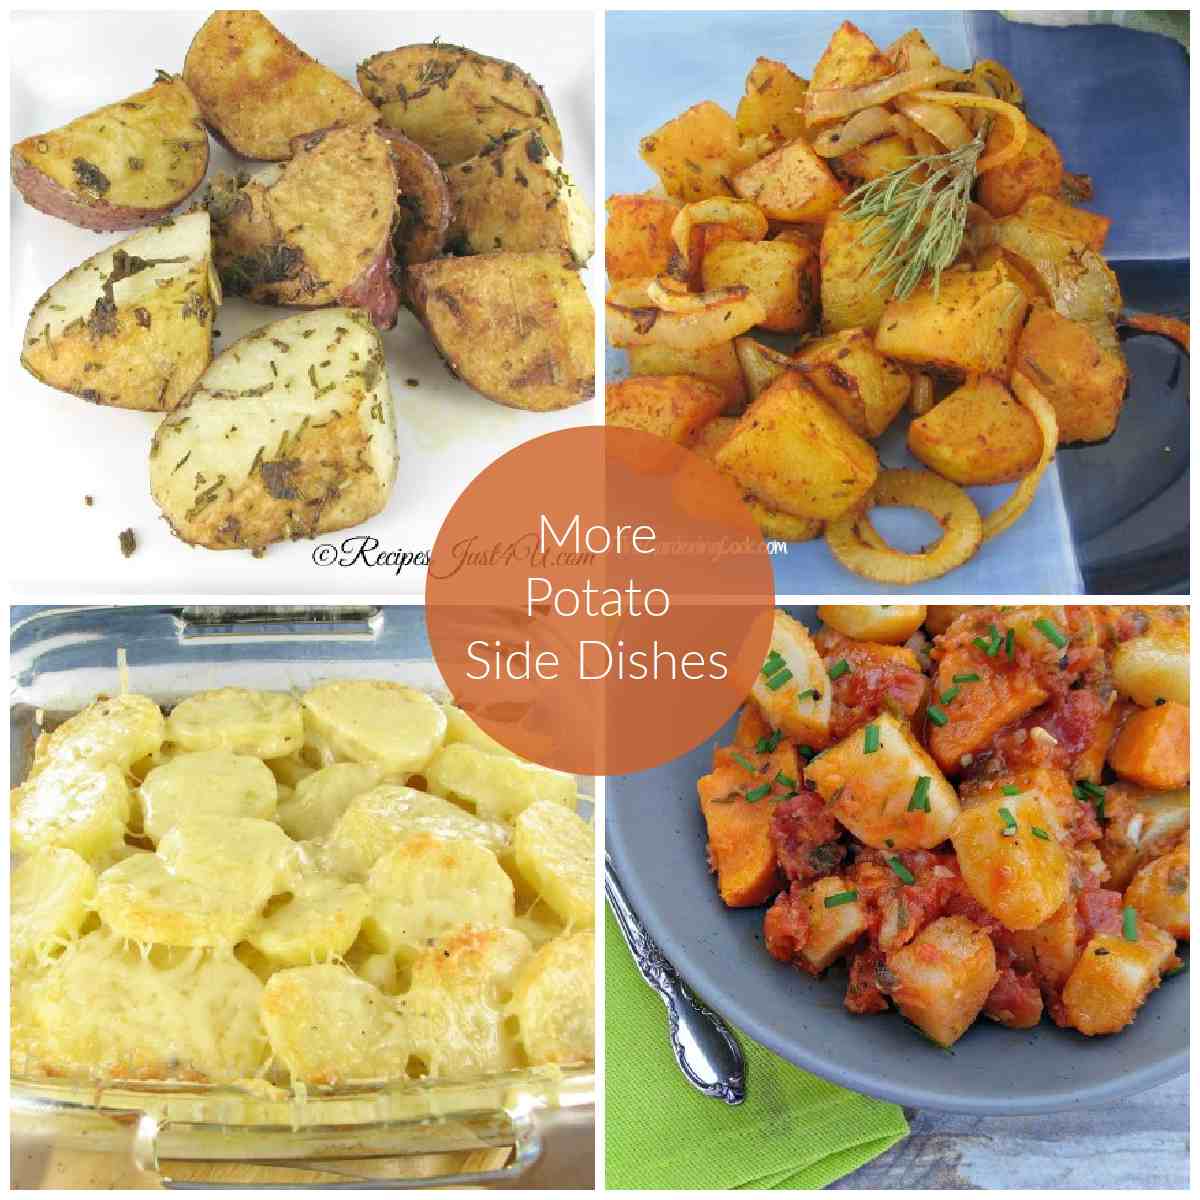 Four easy side dishes with potatoes in a collage with words more potato side dishes.